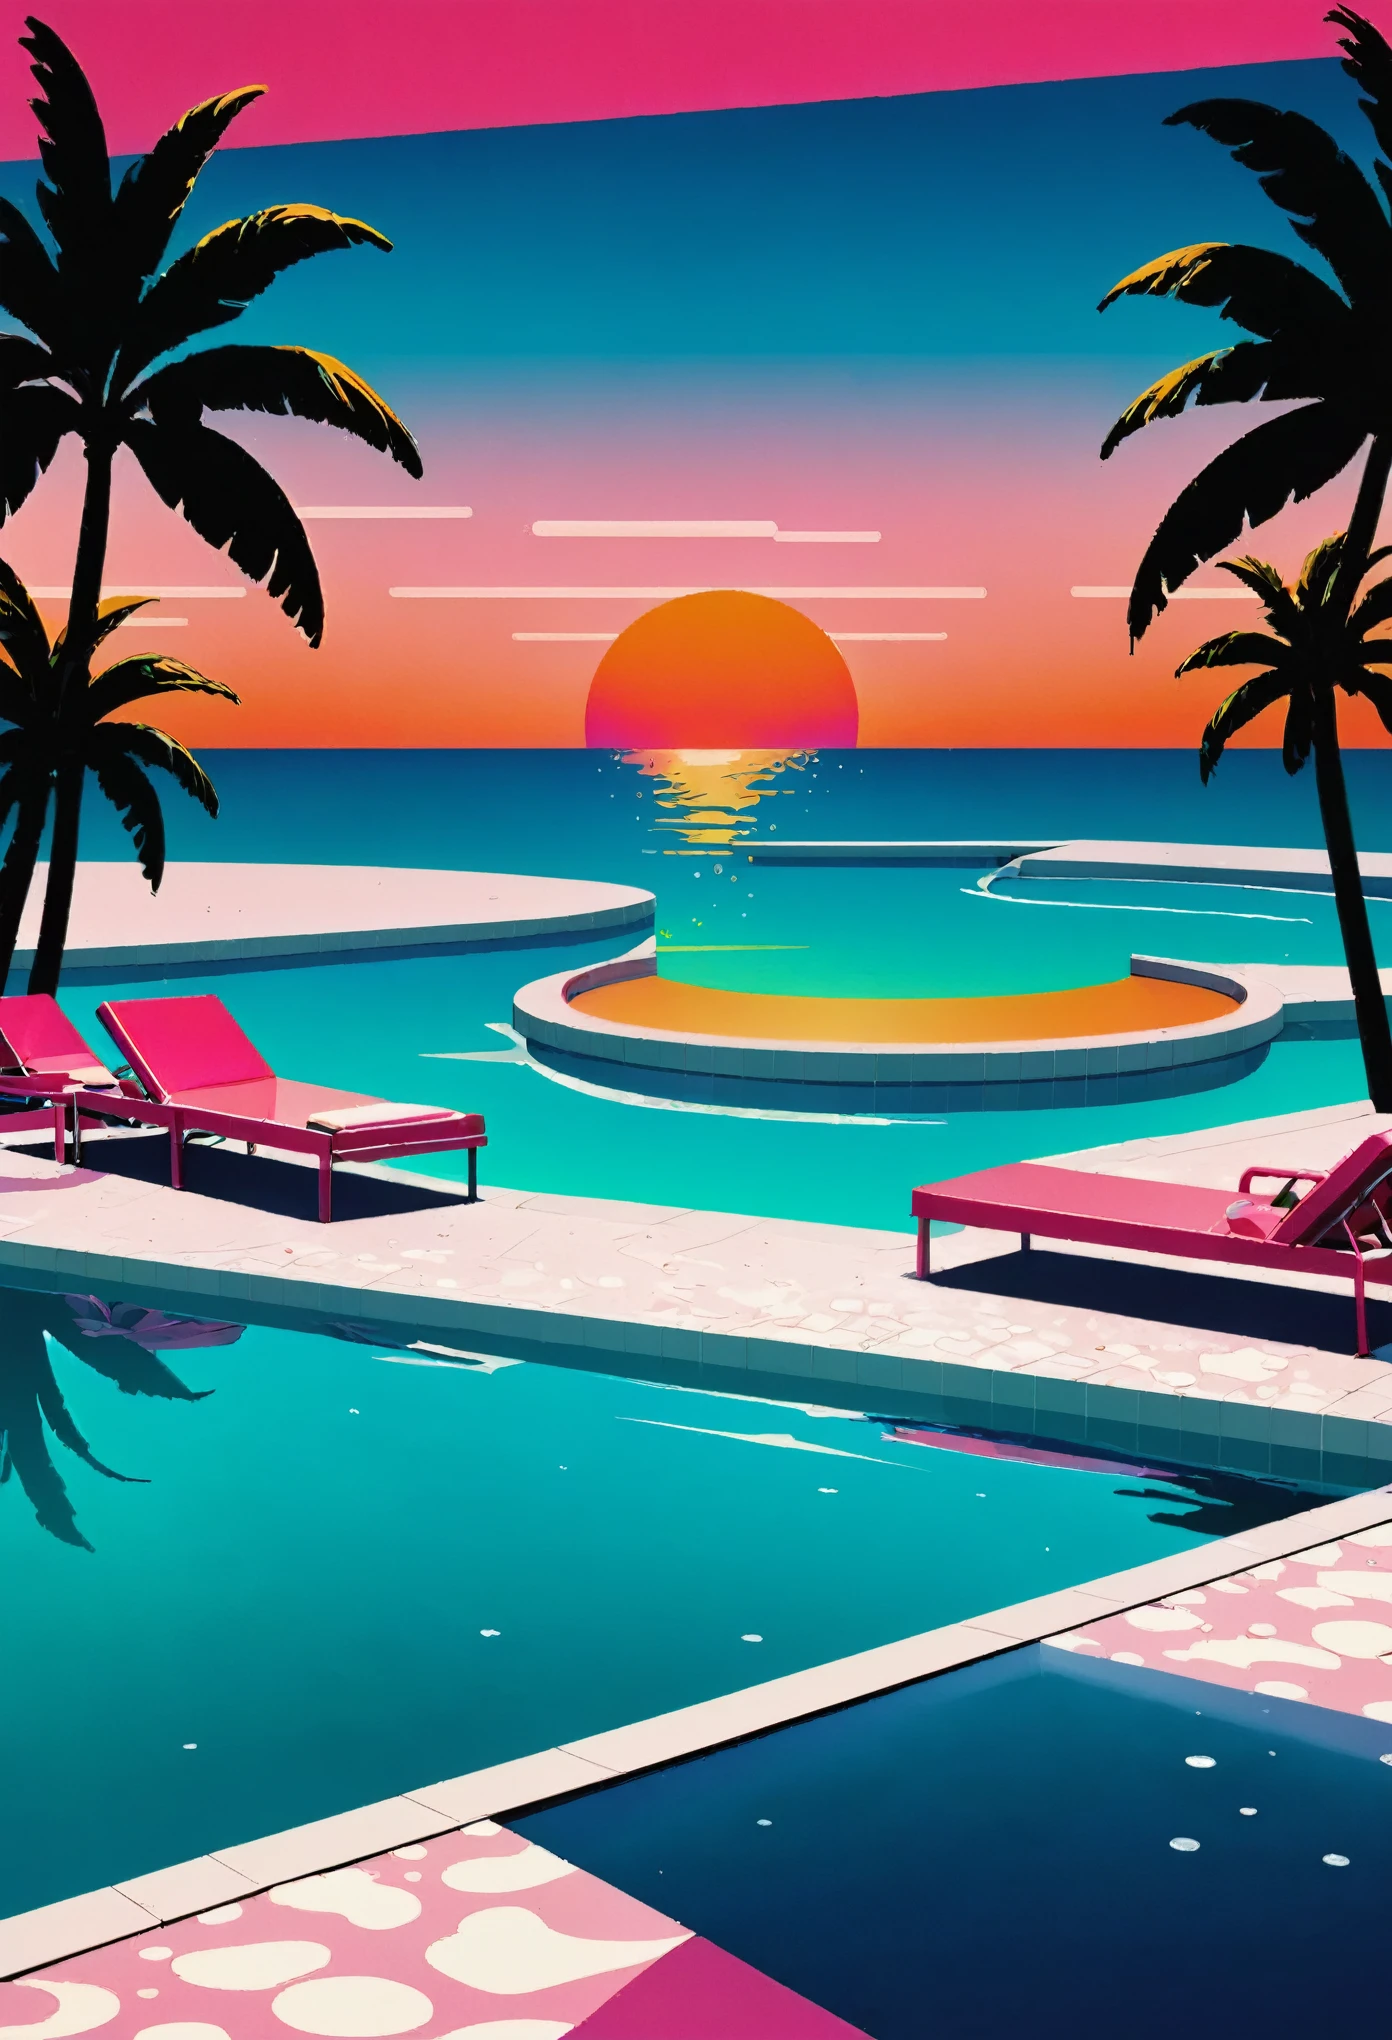 reate an artwork deeply immersed in the vaporwave aesthetic of the 80s, heavily influenced by Yoko Honda's vivid artistic style, adopting a minimalist approach. Picture a retro-futuristic beach and pool scene captured at sunset, illustrated in a 2D, flat perspective without any vanishing points. The sky above blazes with intense hues of orange, pink, and red—vibrant colors that reflect off the calm waters of the sea and pool, producing a visually captivating effect. Around the pool, include neon-lit palm and coconut trees, rendered in a stylized, simple form to enhance the tropical and otherworldly ambiance with sparse but striking placements. Decorate the pool area with whimsical 80s-themed floaties, such as neon flamingos and unicorns, adding a playful and nostalgic touch. Additionally, integrate geometric neon lights that cast a surreal glow across the scene, providing minimal yet effective illumination. The setting features a stylish, minimalist beachside bar visible behind large, flat glass windows. Inside, the bar should display pastel-colored walls and floors adorned with luxurious terrazzo and marble textures, achieved using Yoko Honda’s signature textured brushes to create a tactile and visually rich surface. Place chic 80s-style drinks and cocktails along the poolside to emphasize the leisure lifestyle of the decade. This scene merges retro luxury with vibrant, warm color palettes in a minimalist, flat 2D composition, crafting a scene that is not only timeless but also distinctively reminiscent of the 80s and true to Yoko Honda’s style.